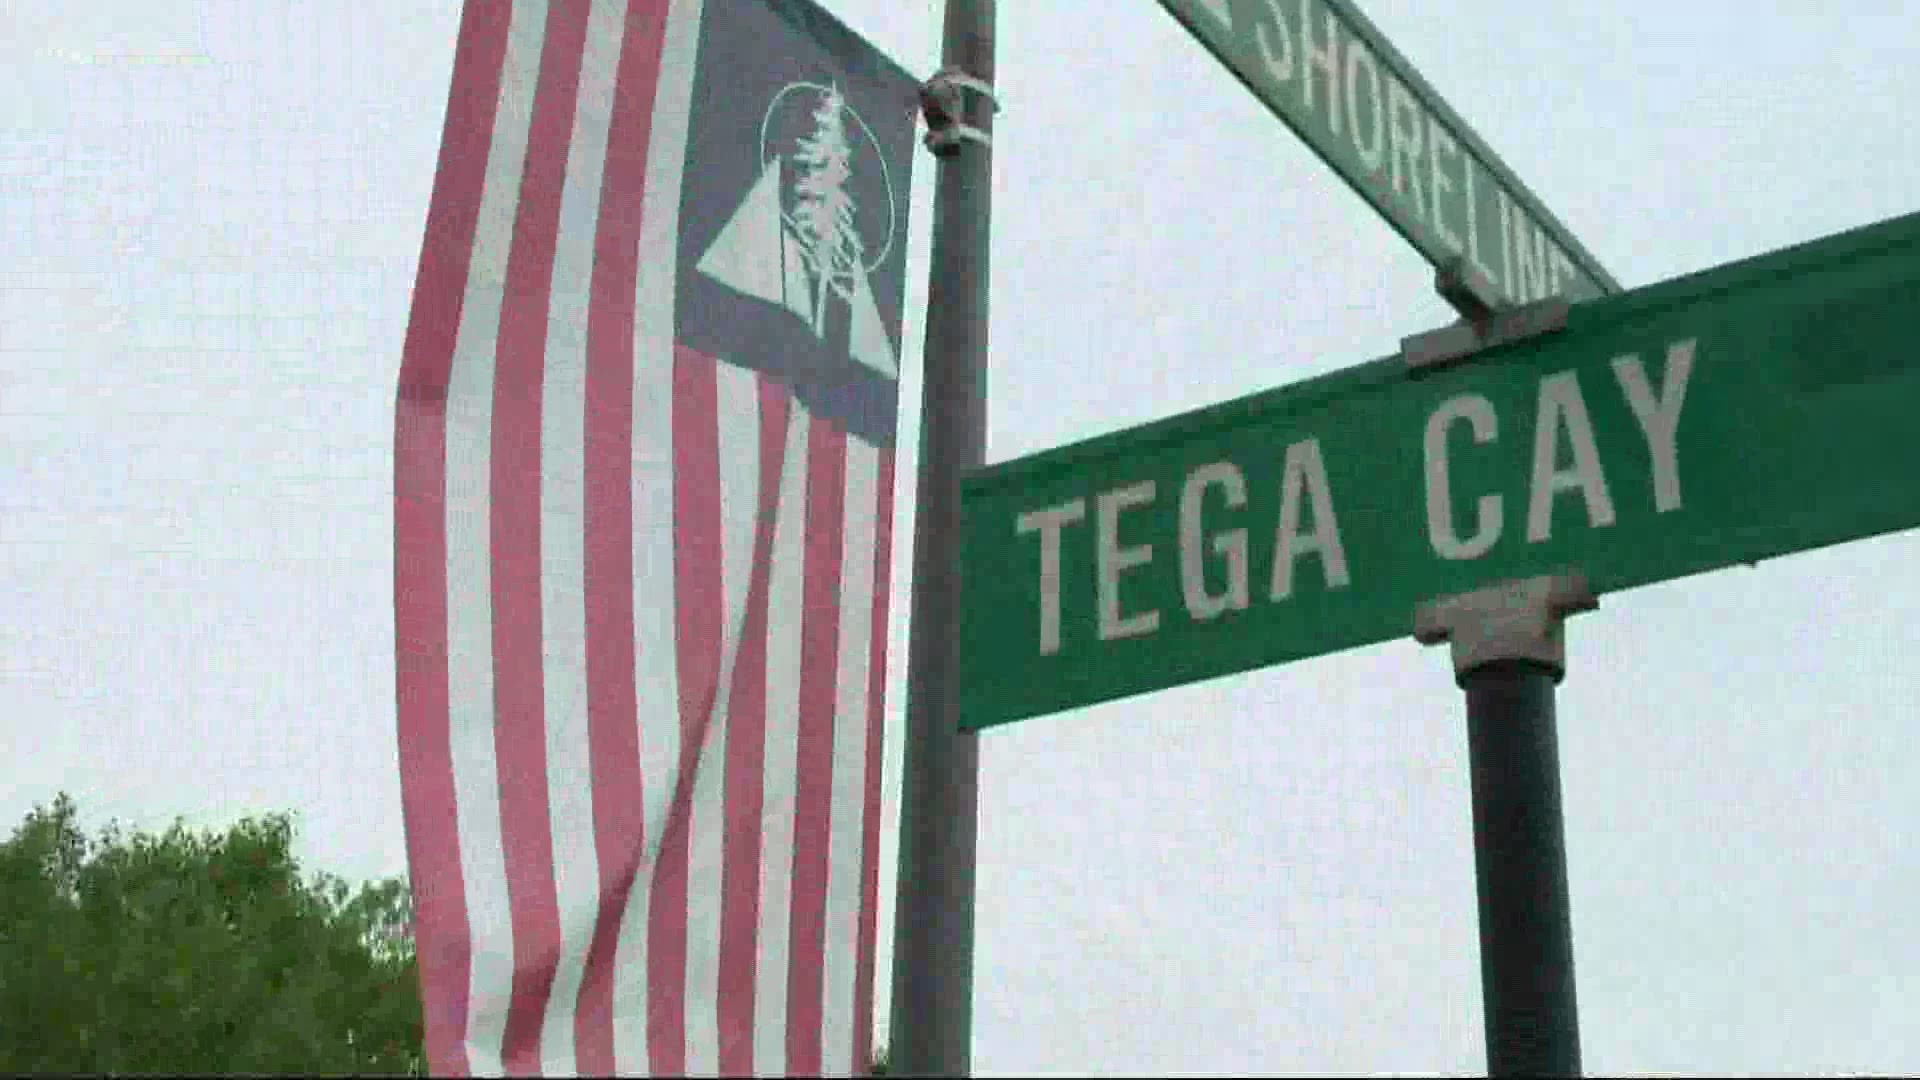 In Tega Cay the flags are flying and so are the opinions about whether the city should have its annual fireworks show